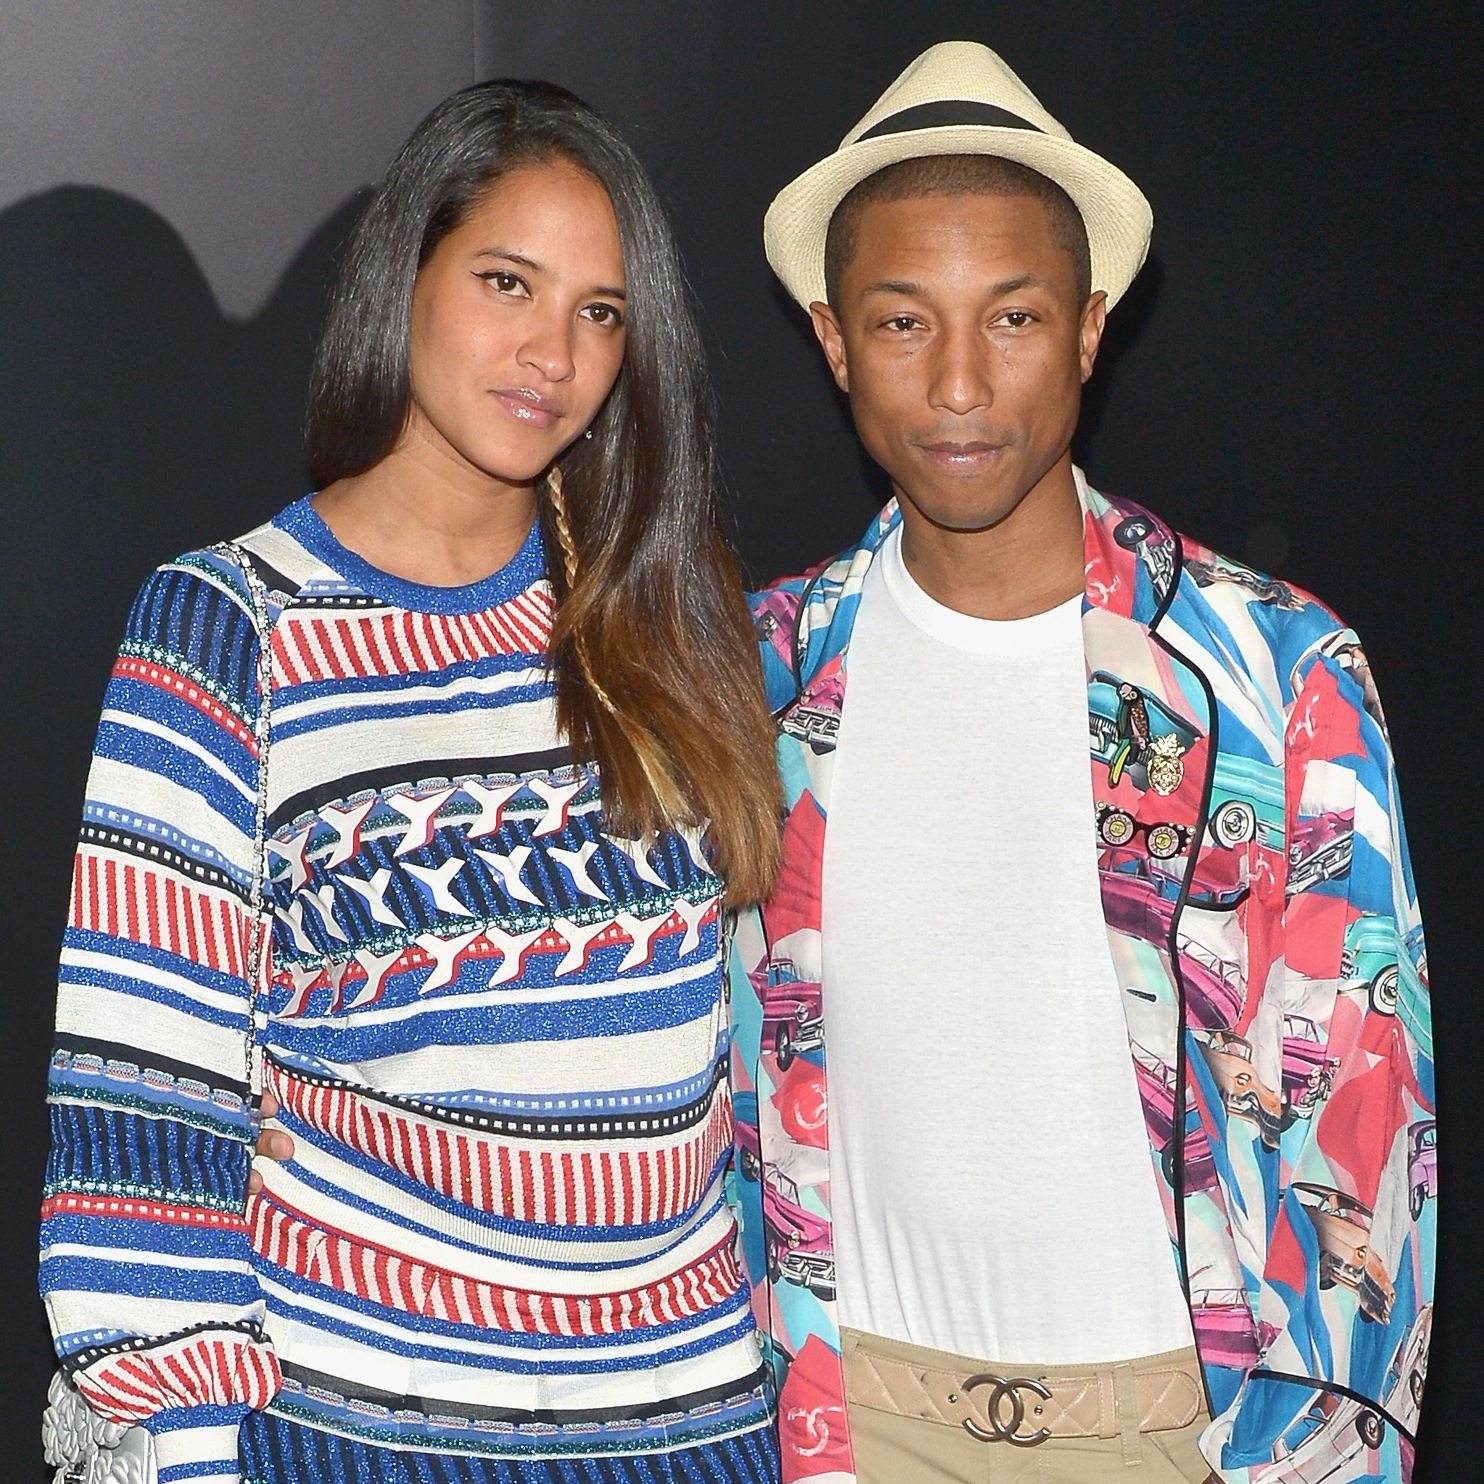 OMG! Pharrell Williams and wife Helen Lasichanh are expecting baby number 2!